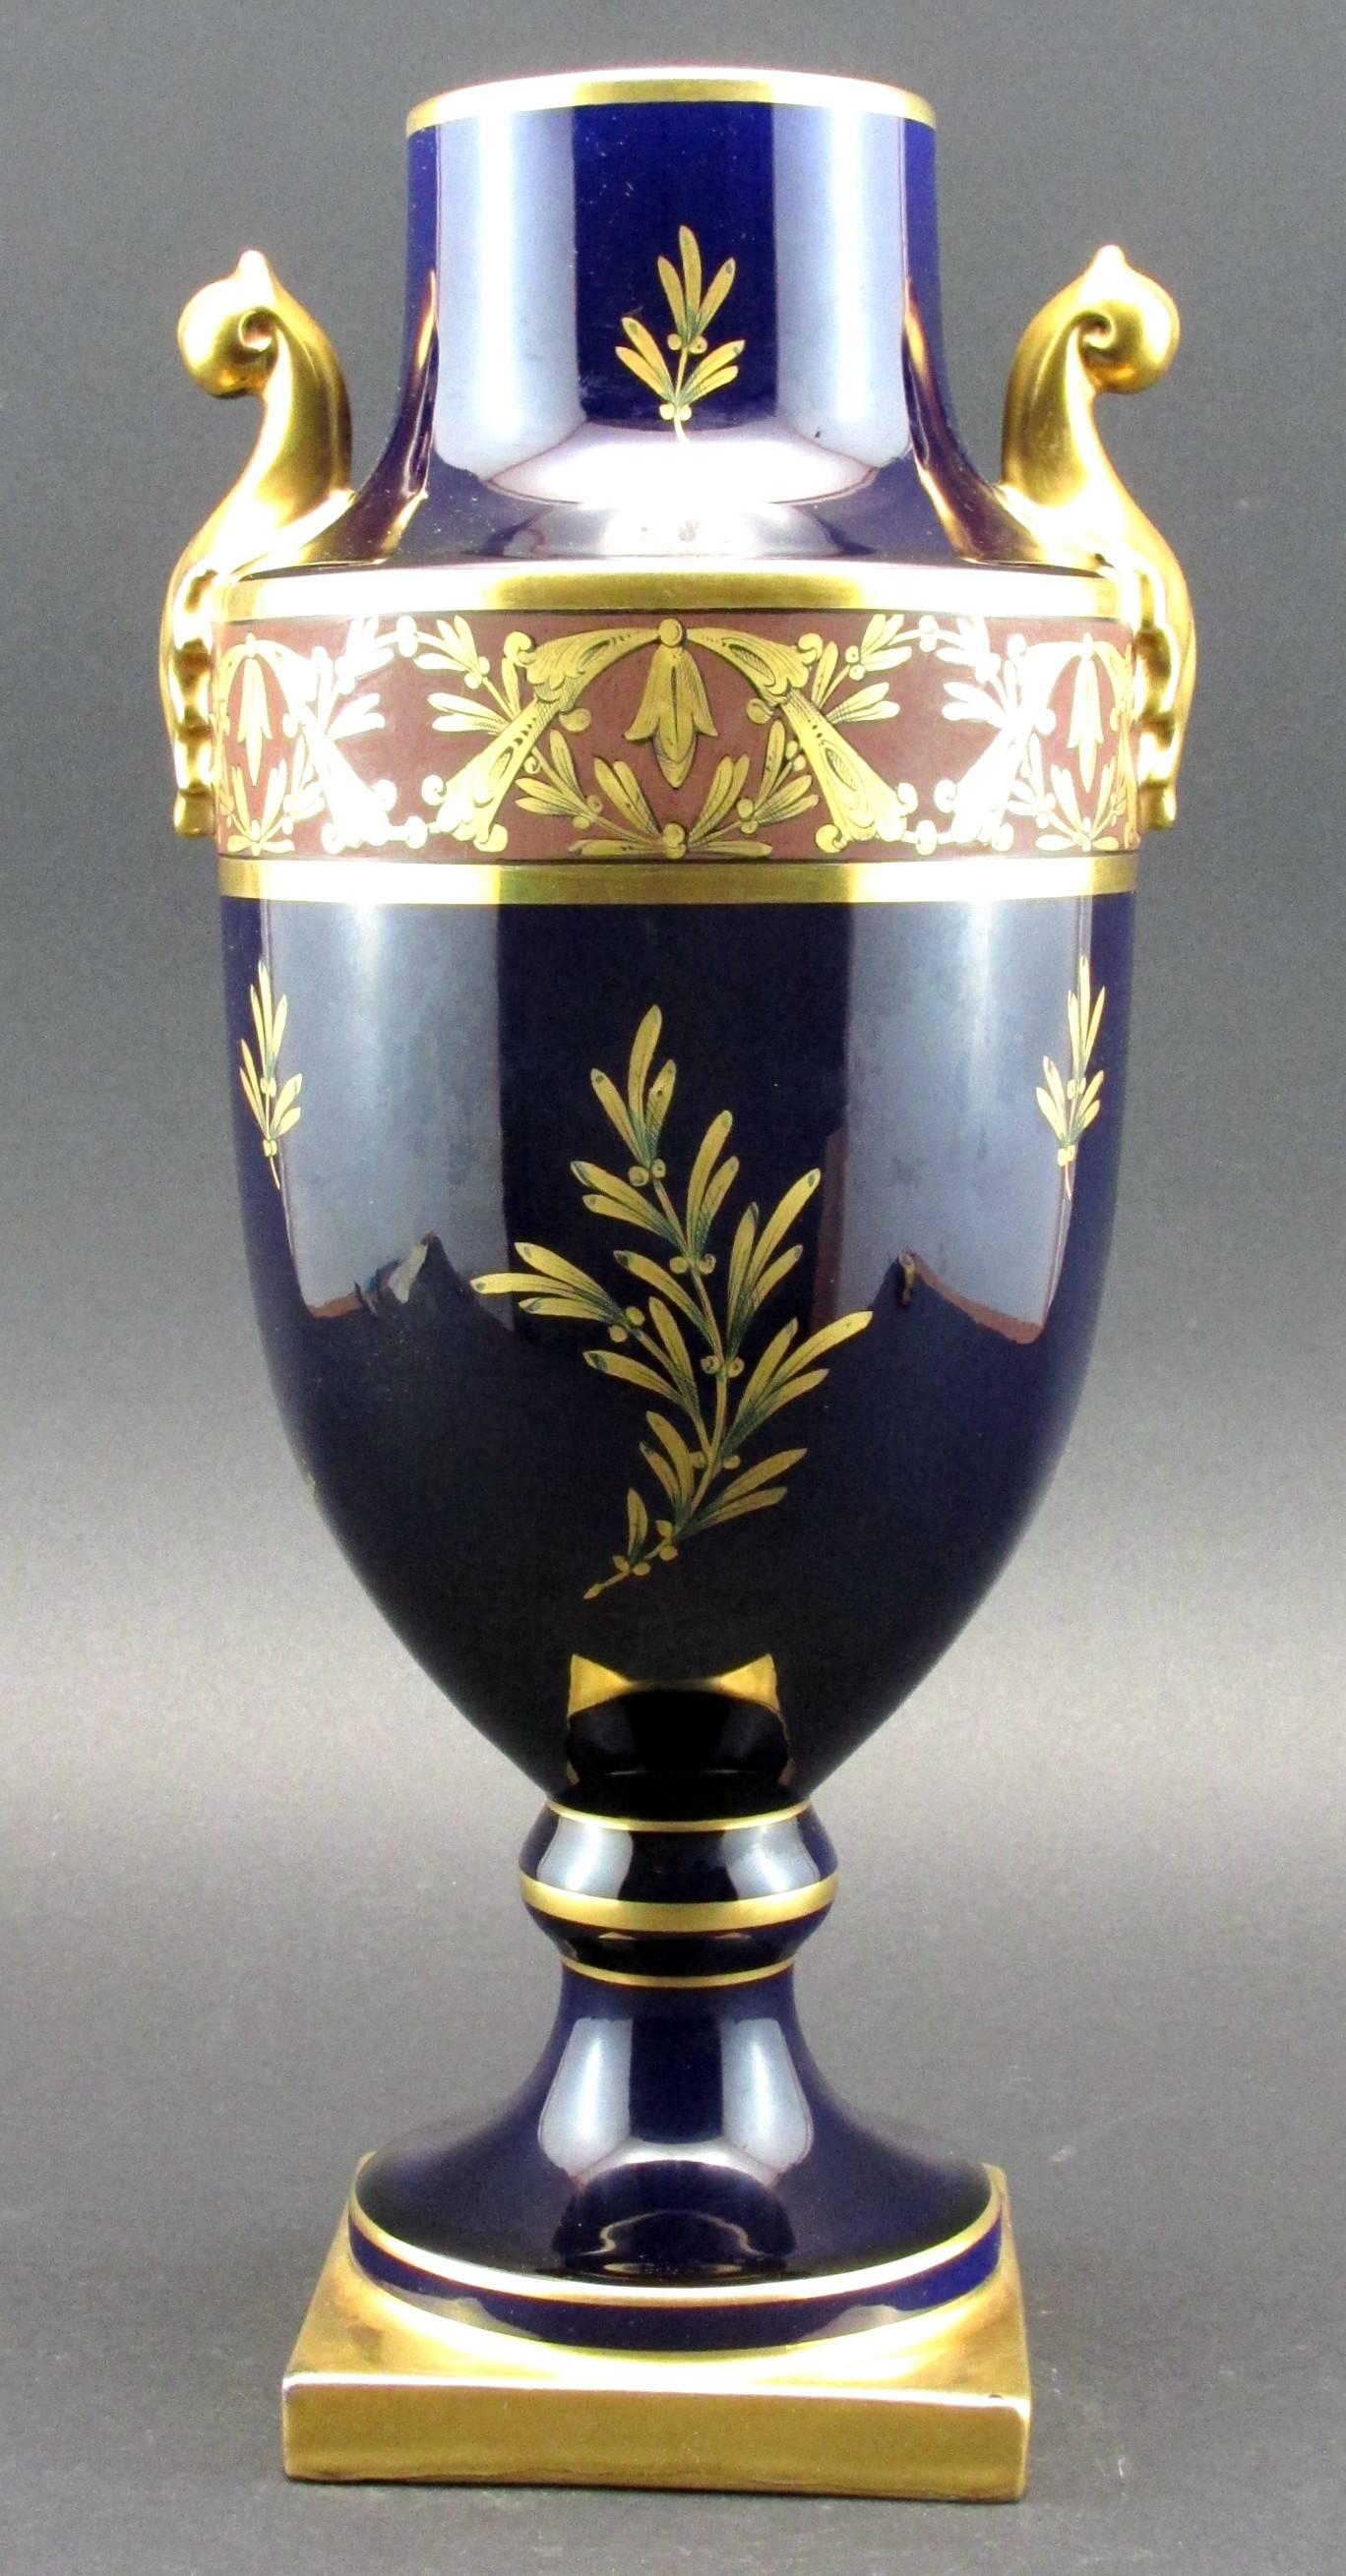 The exceptionally large cobalt glazed urn-shaped body richly decorated with cornucopia & foliate gilt motifs, sided by stylized palmette-shaped gilt handles. Signed on the body in gilt script ‘Pinon Heuze’, the underside of the base bearing